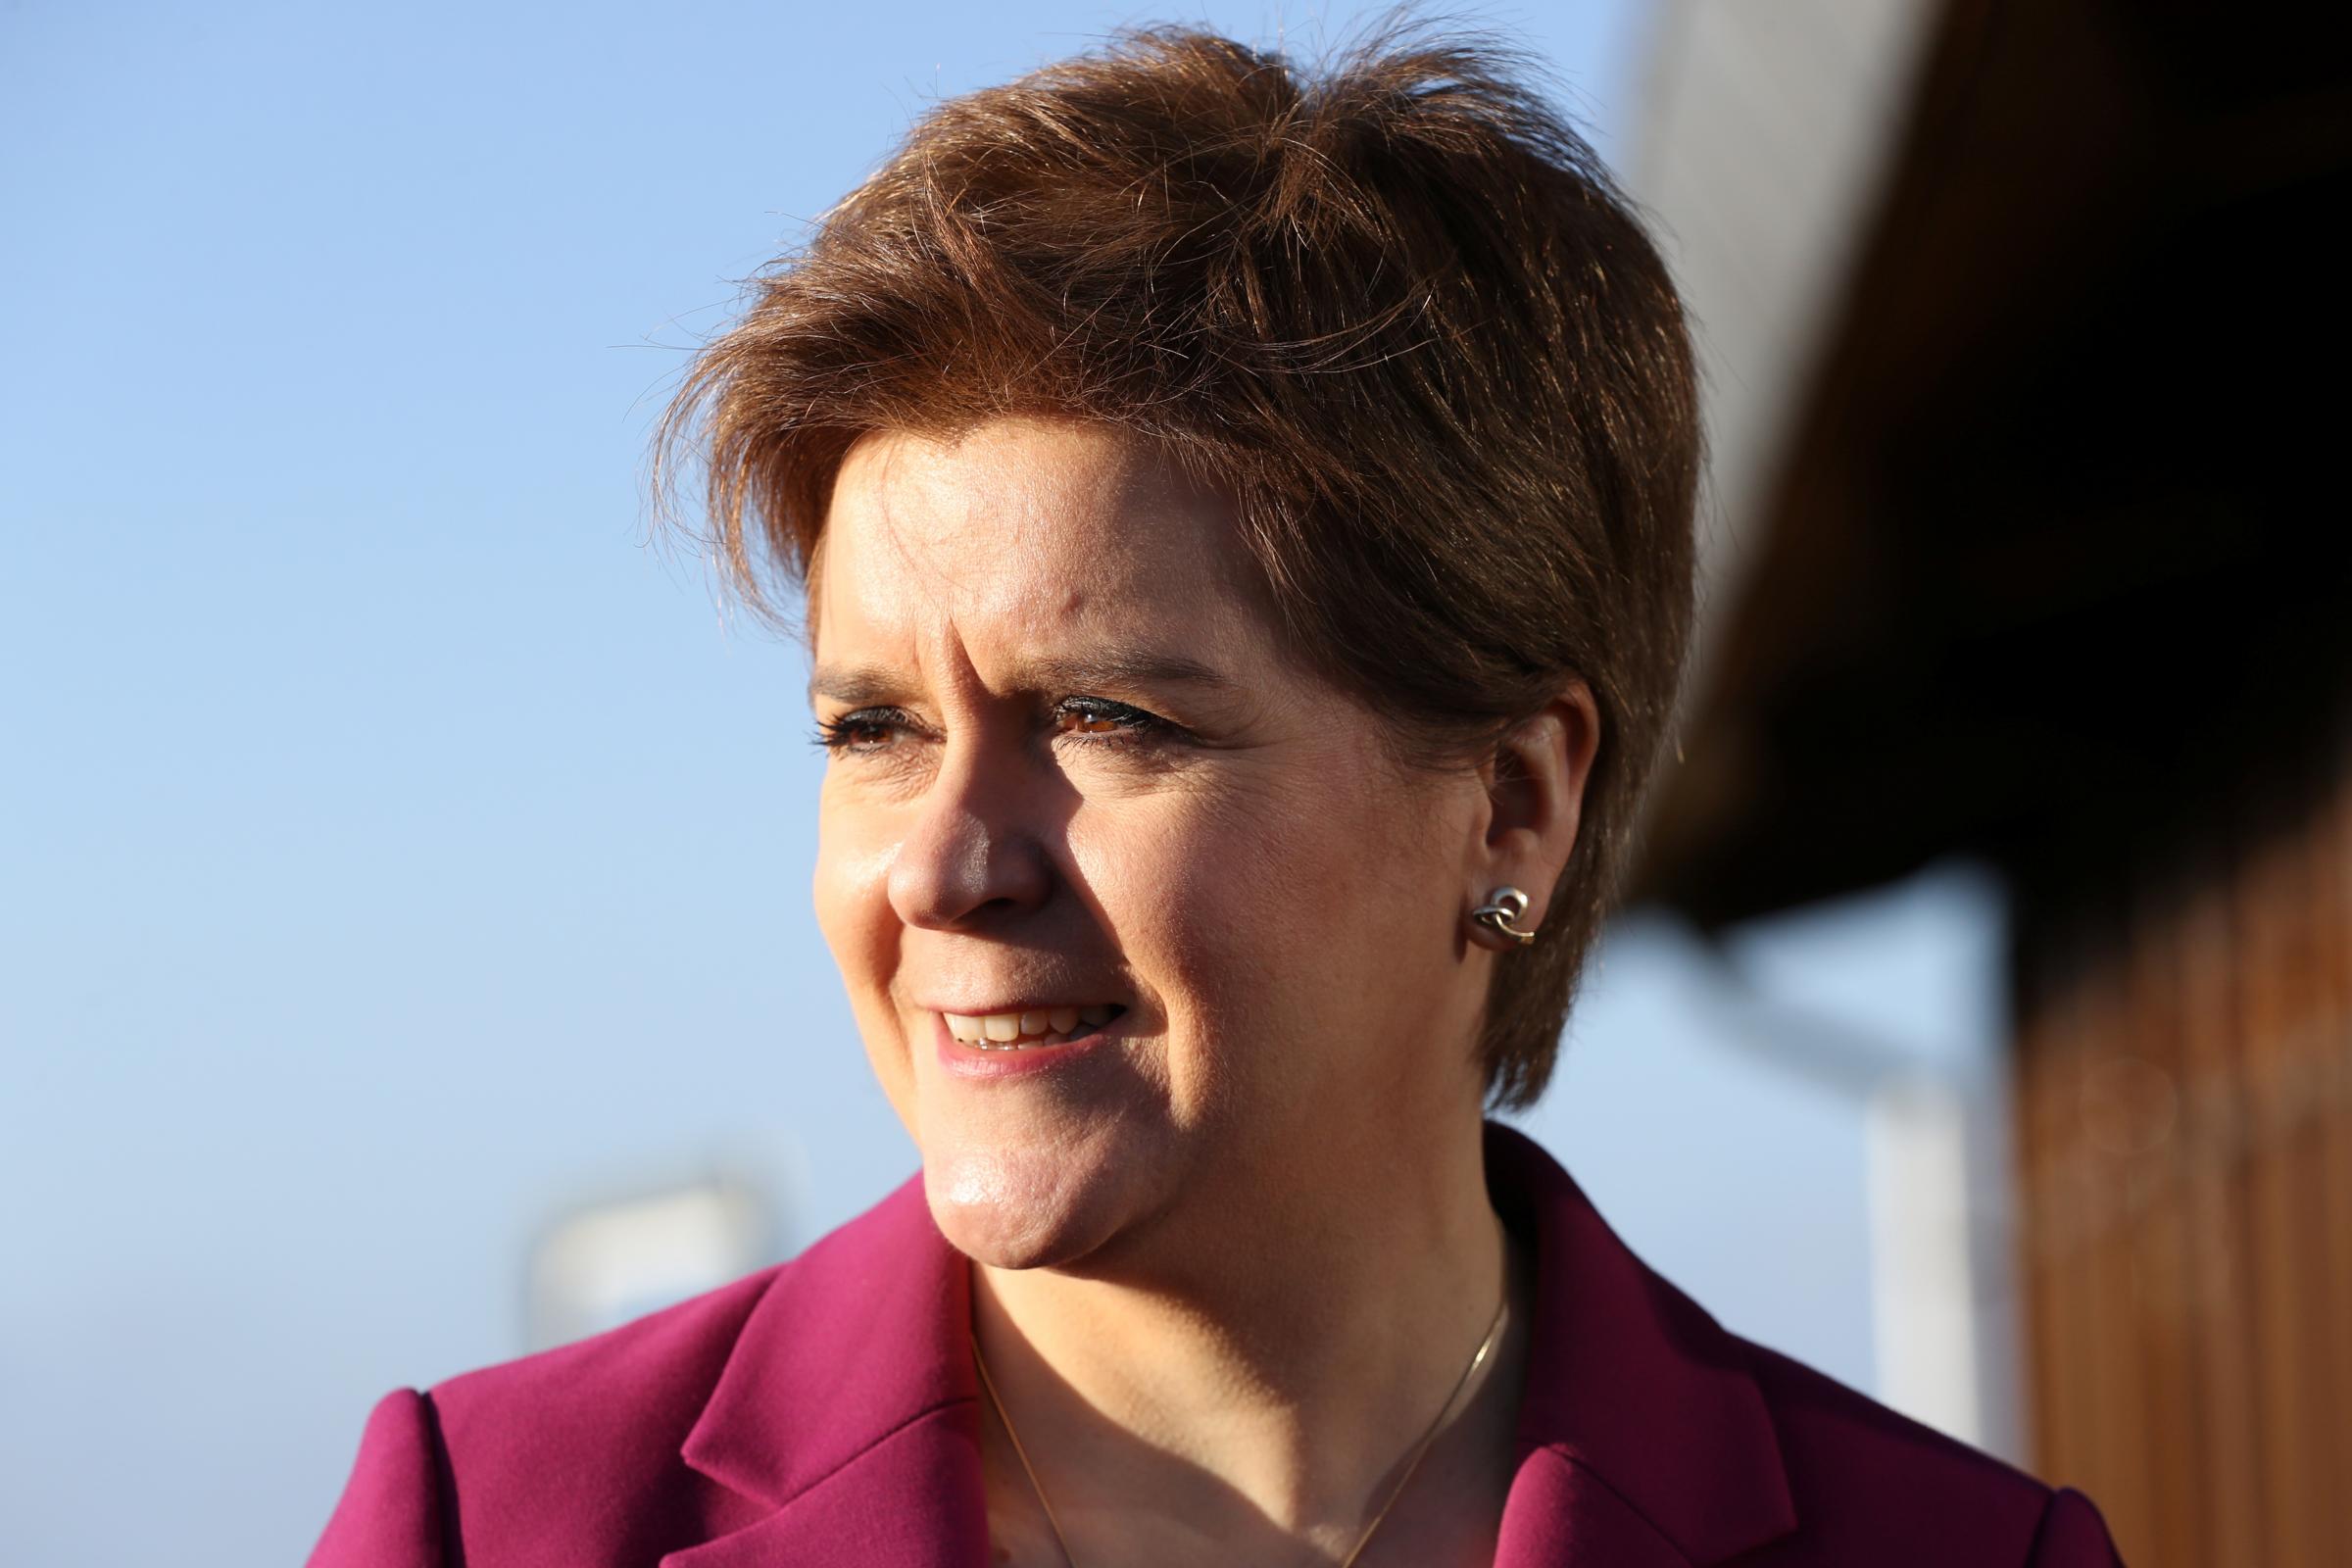 Nicola Sturgeon Covid announcement today - what time and watch update live  | HeraldScotland